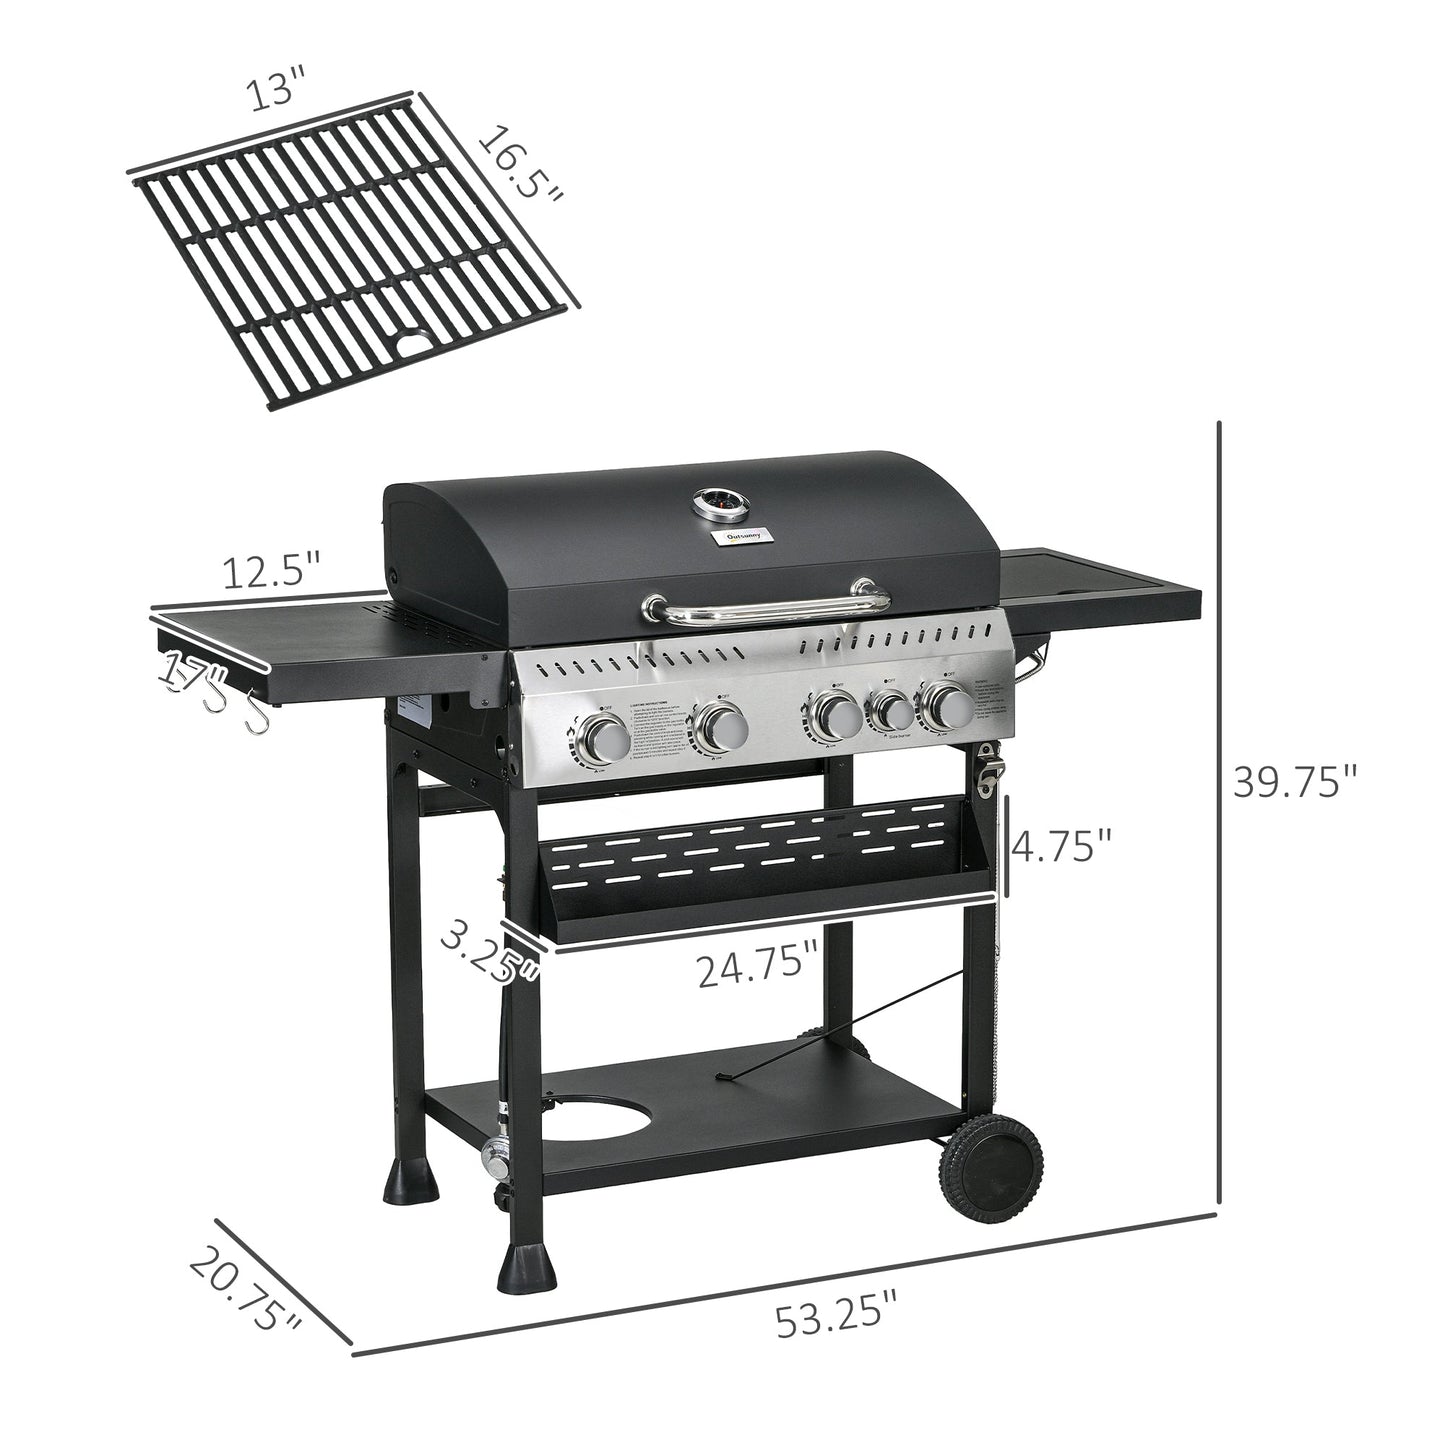 -Outsunny 4+1 Burner Propane Gas Grill, 40,000 BTU Outdoor BBQ Trolley with Warming Rack, Shelves, Bottle Opener, Thermometer - Outdoor Style Company